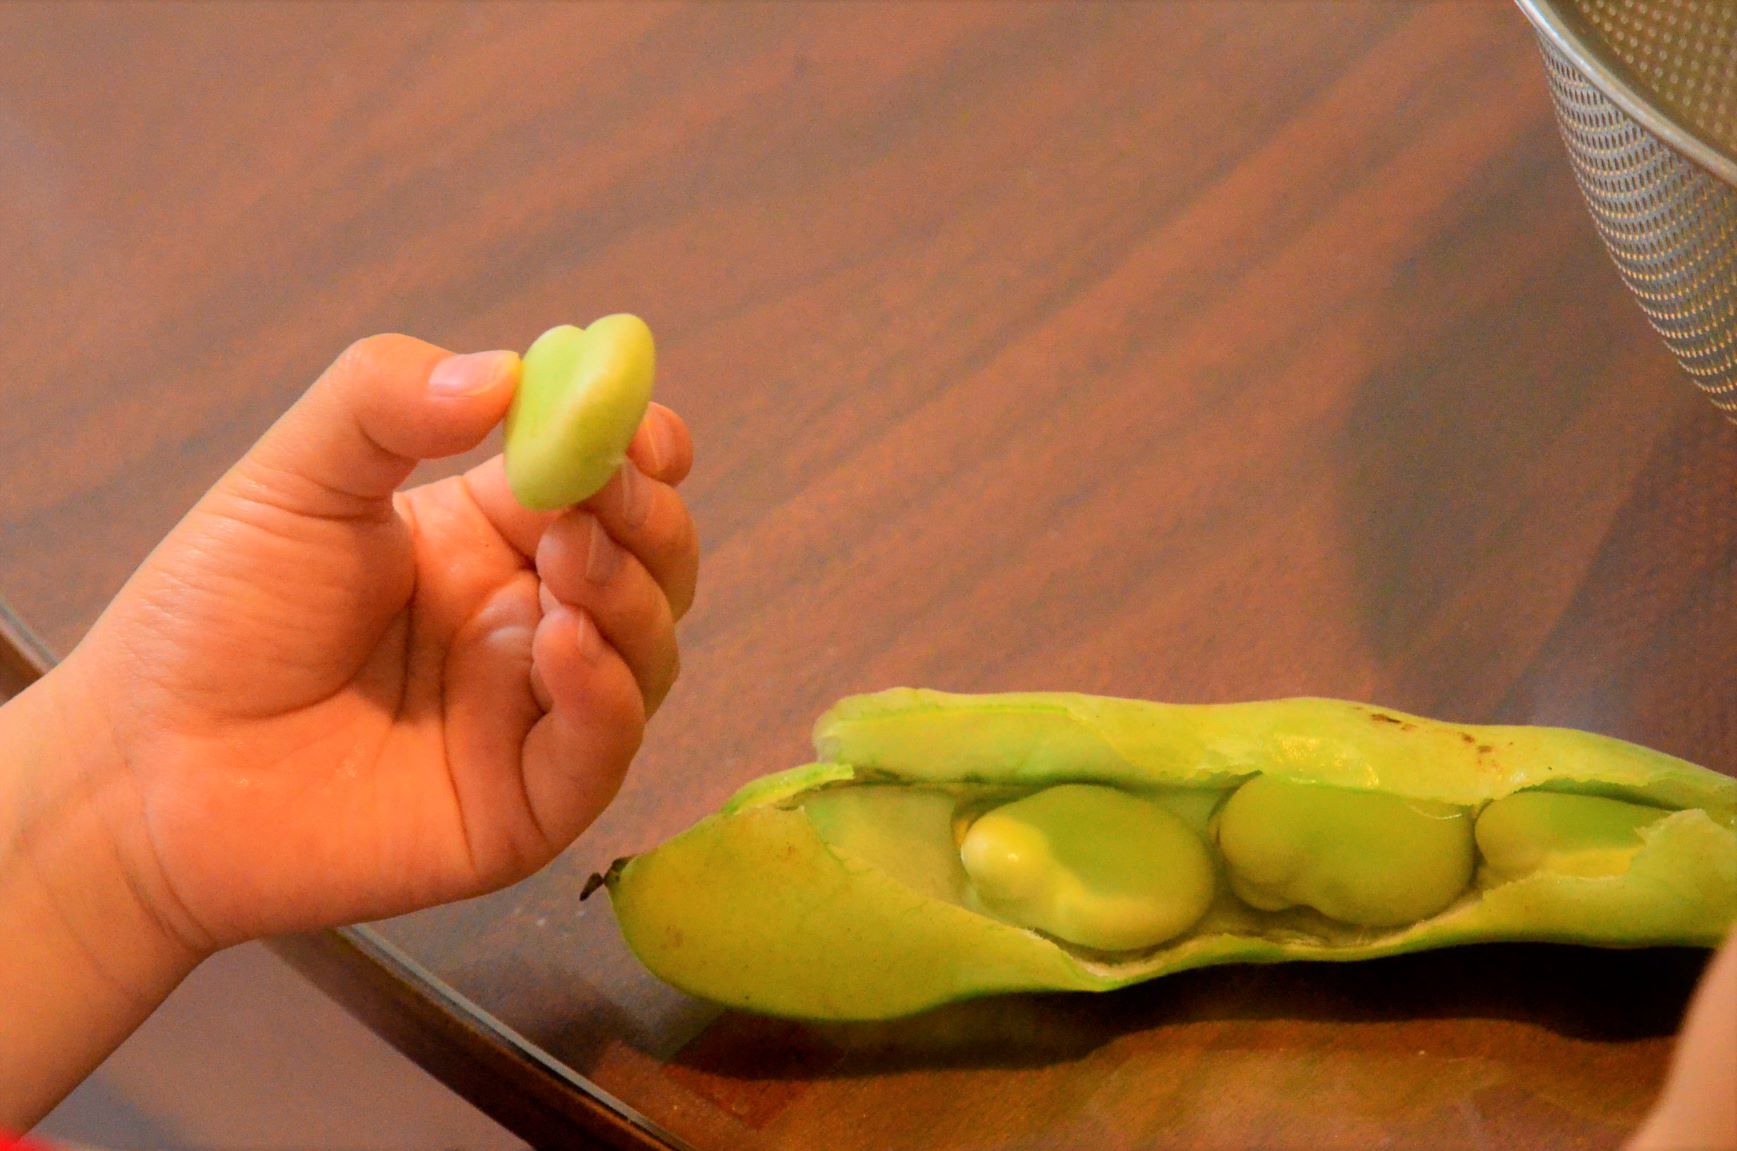 There were four broad beans in a bunch